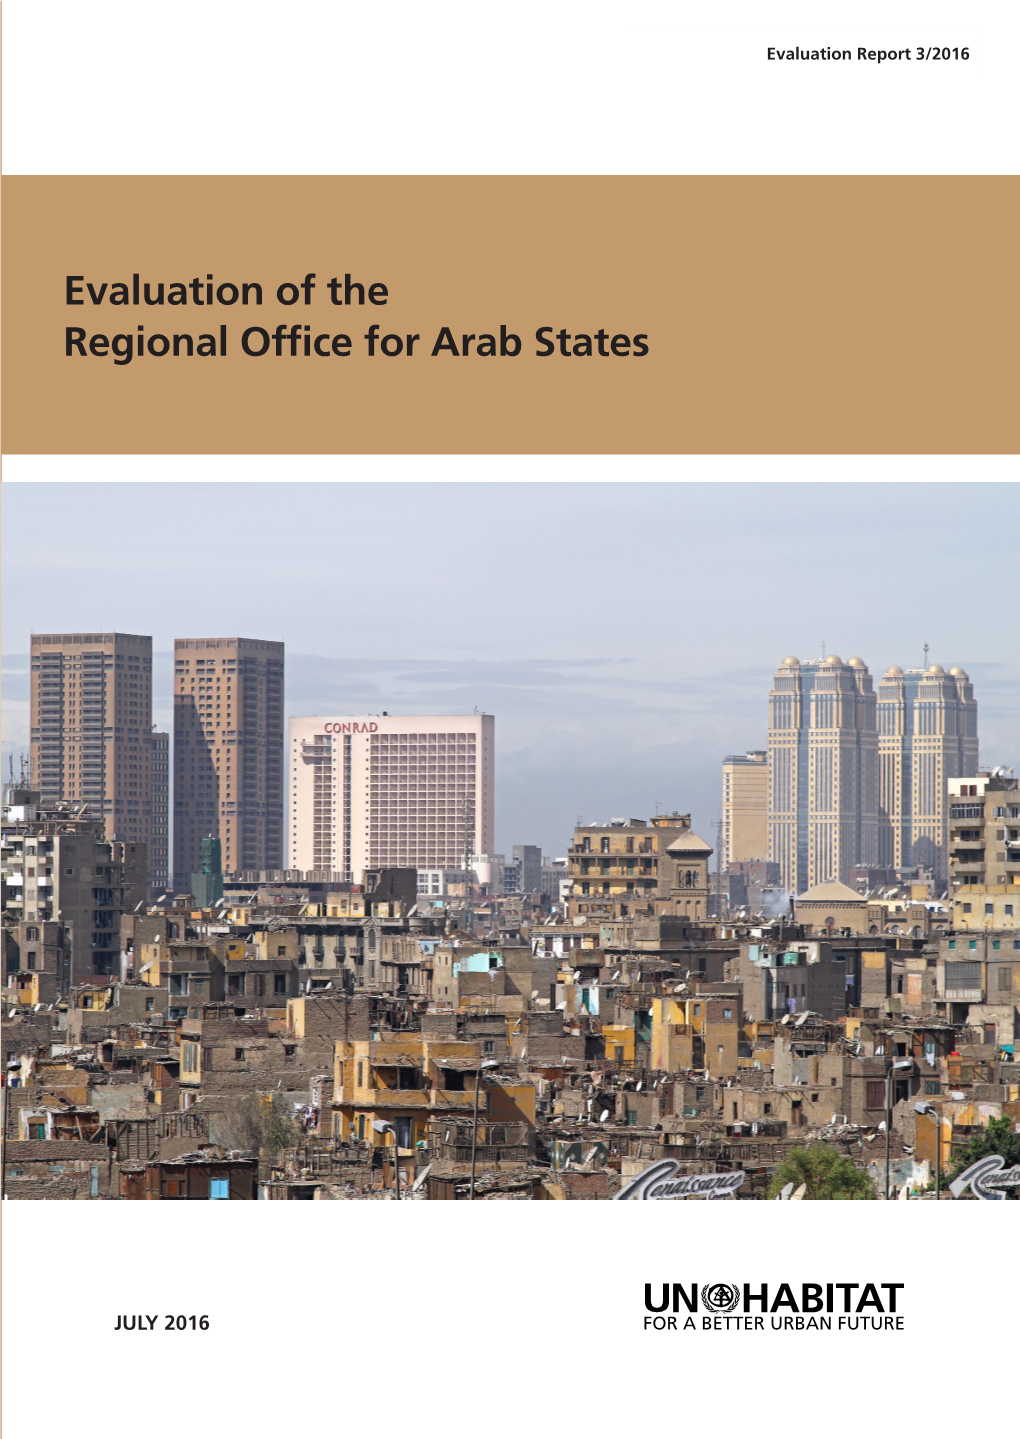 Evaluation of the Regional Office for Arab States